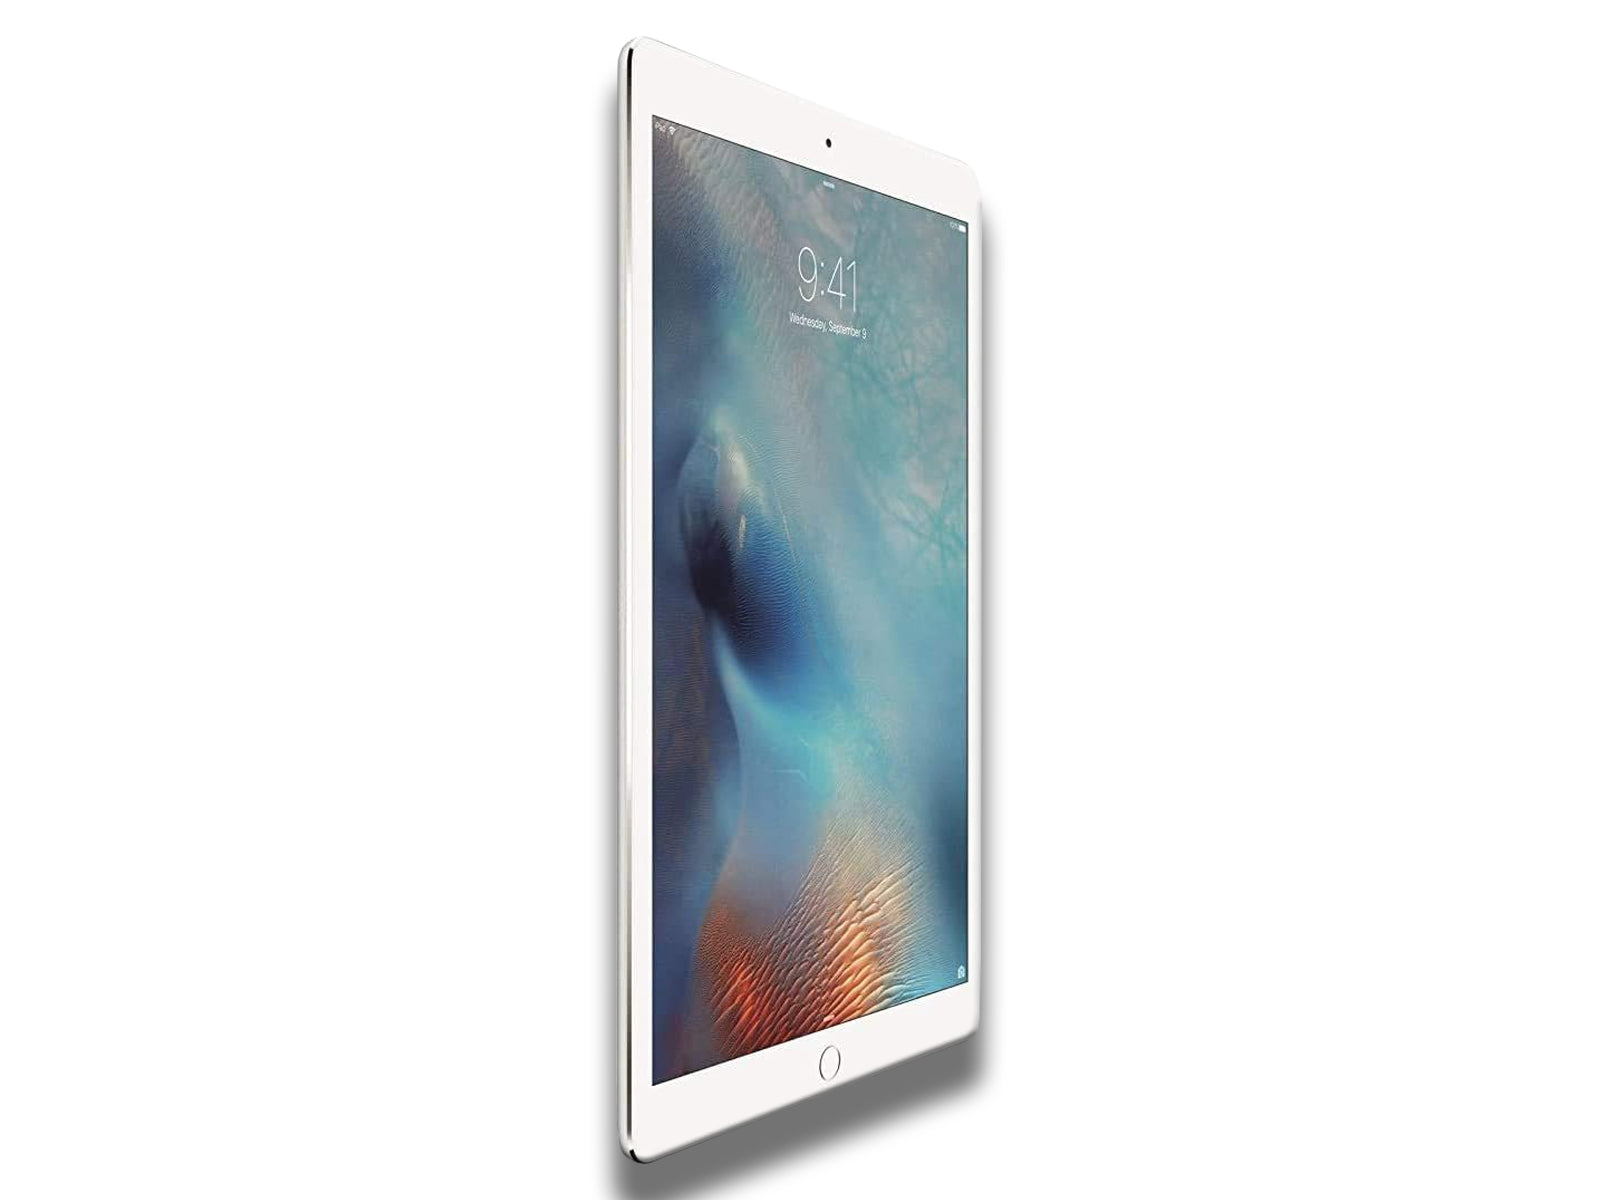 Image shows an angled side view of the Apple iPad Pro 12.9-inch 2nd Generation